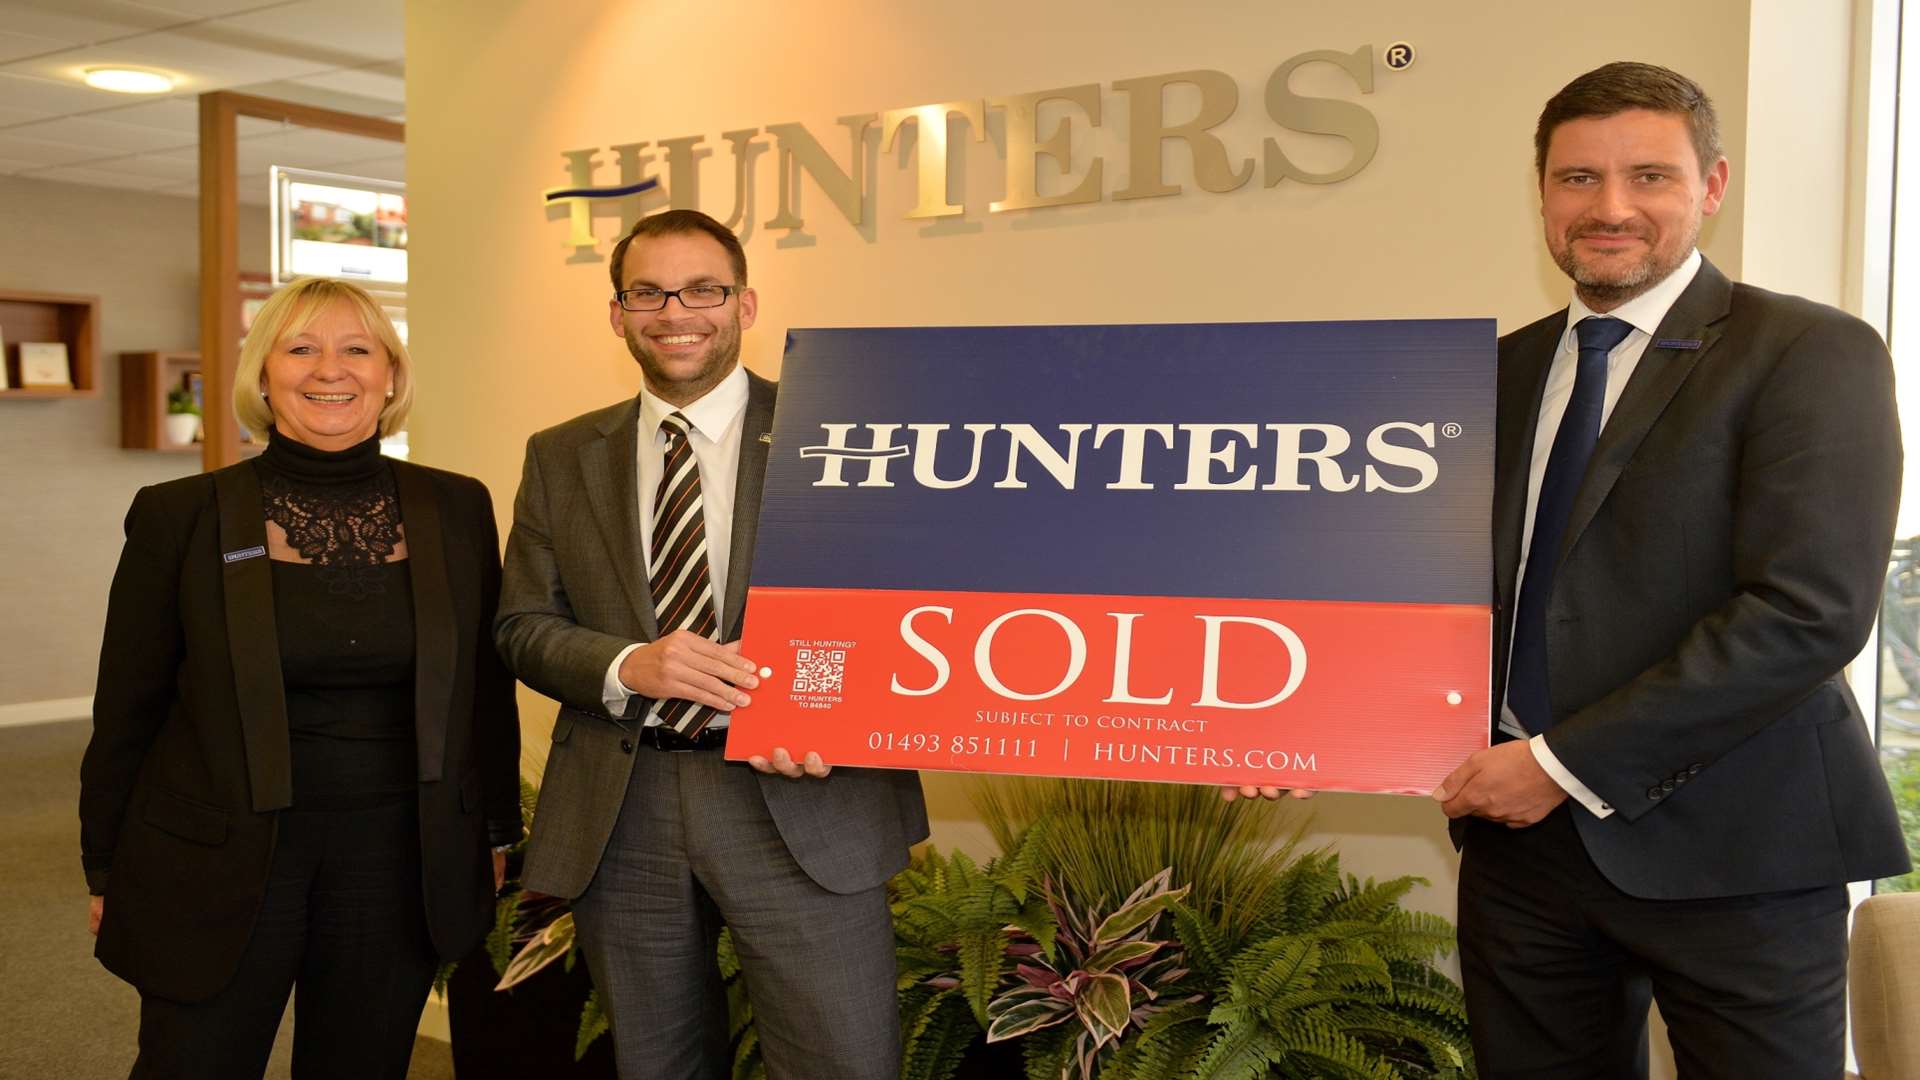 The Hunters estate agencies are opened by, from left, Hunters Property Plc managing director Glynis Frew and Hunters Kent franchise partners Andrew Barker and Rob Stewart